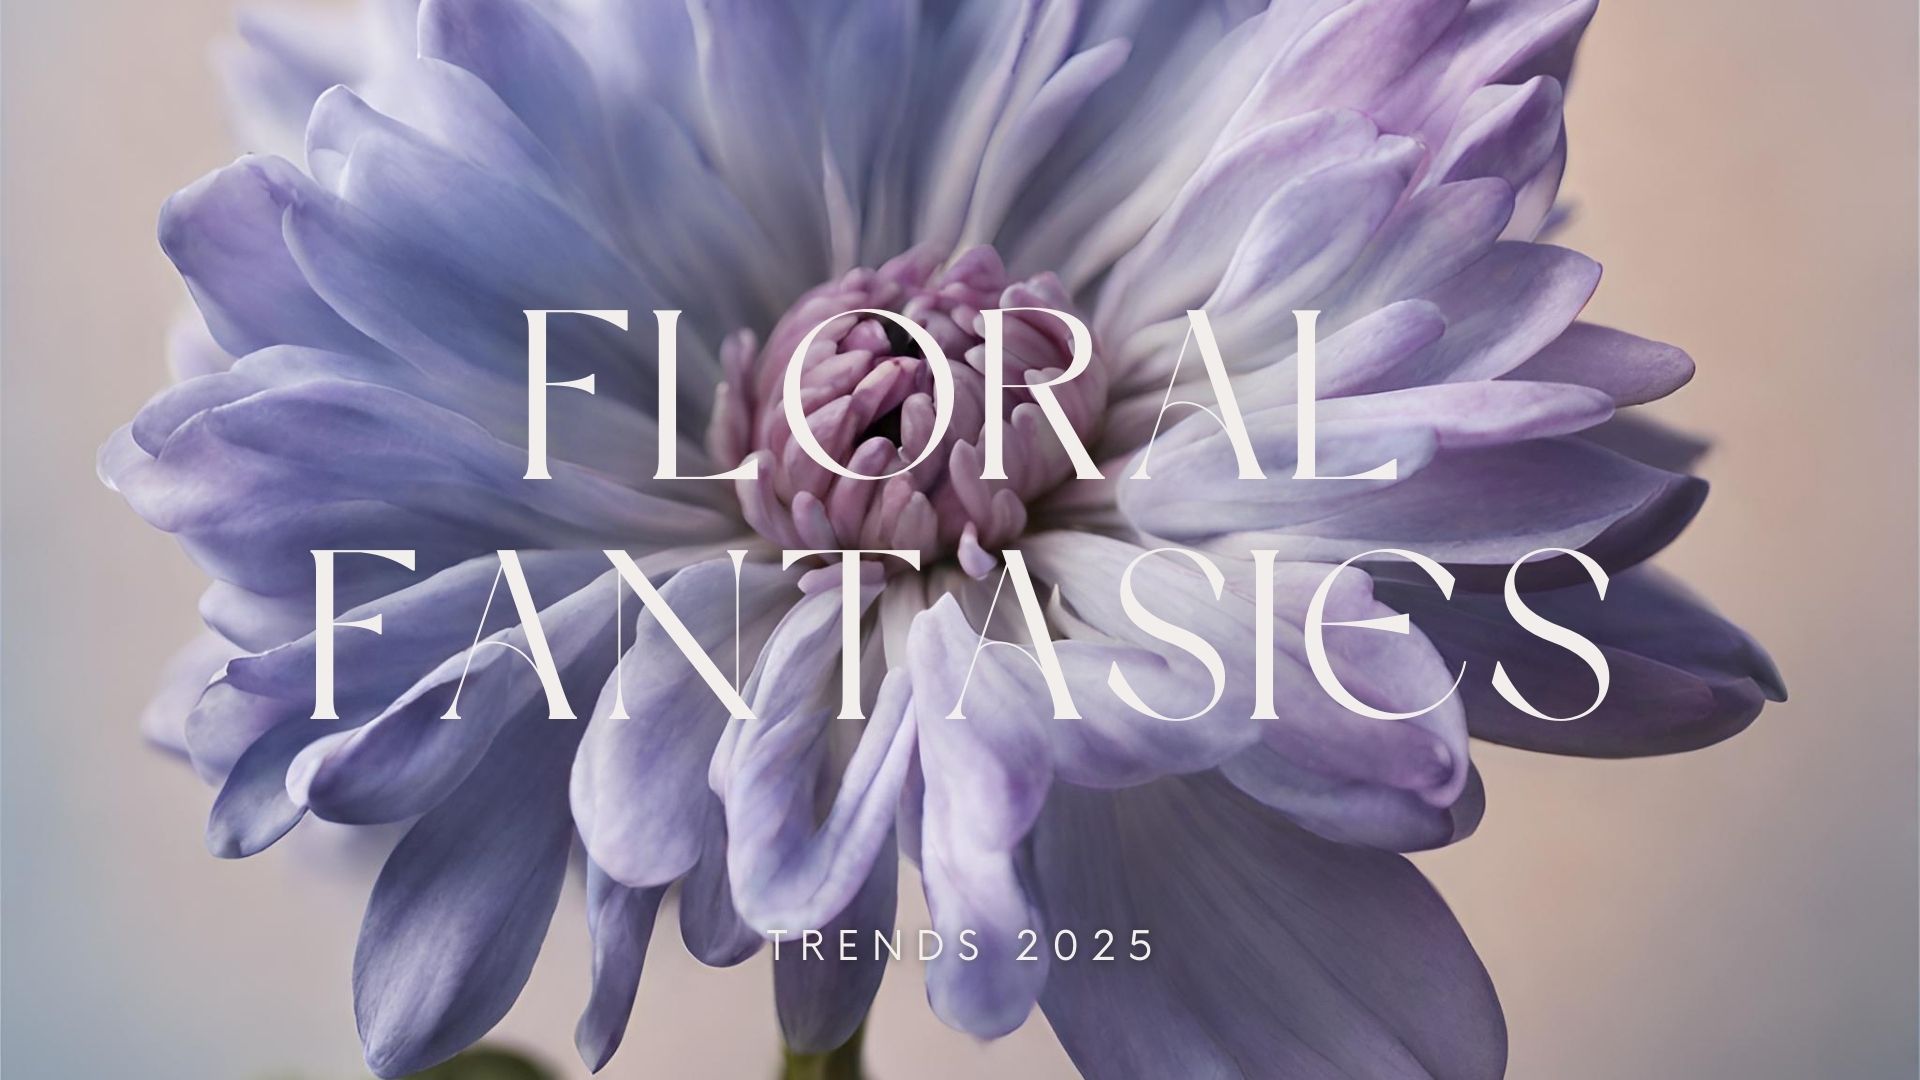 Floral Fantasies Report – Trend 2025 Interiors & Fashion - Moods